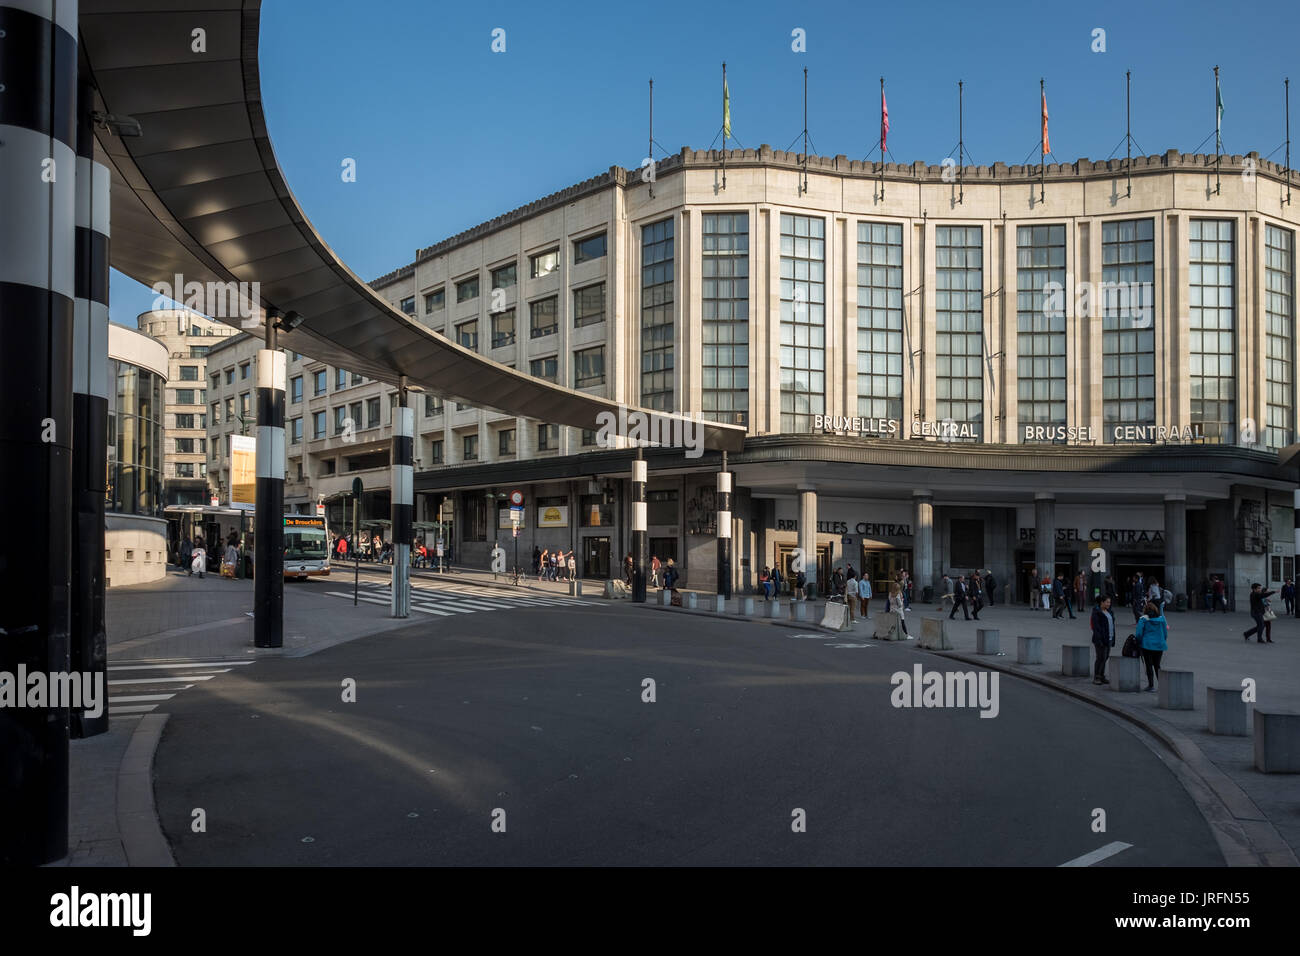 Main entrance to Brussels Central Train station, Saturday 8 April 2017, Brussels, Belgium. Stock Photo